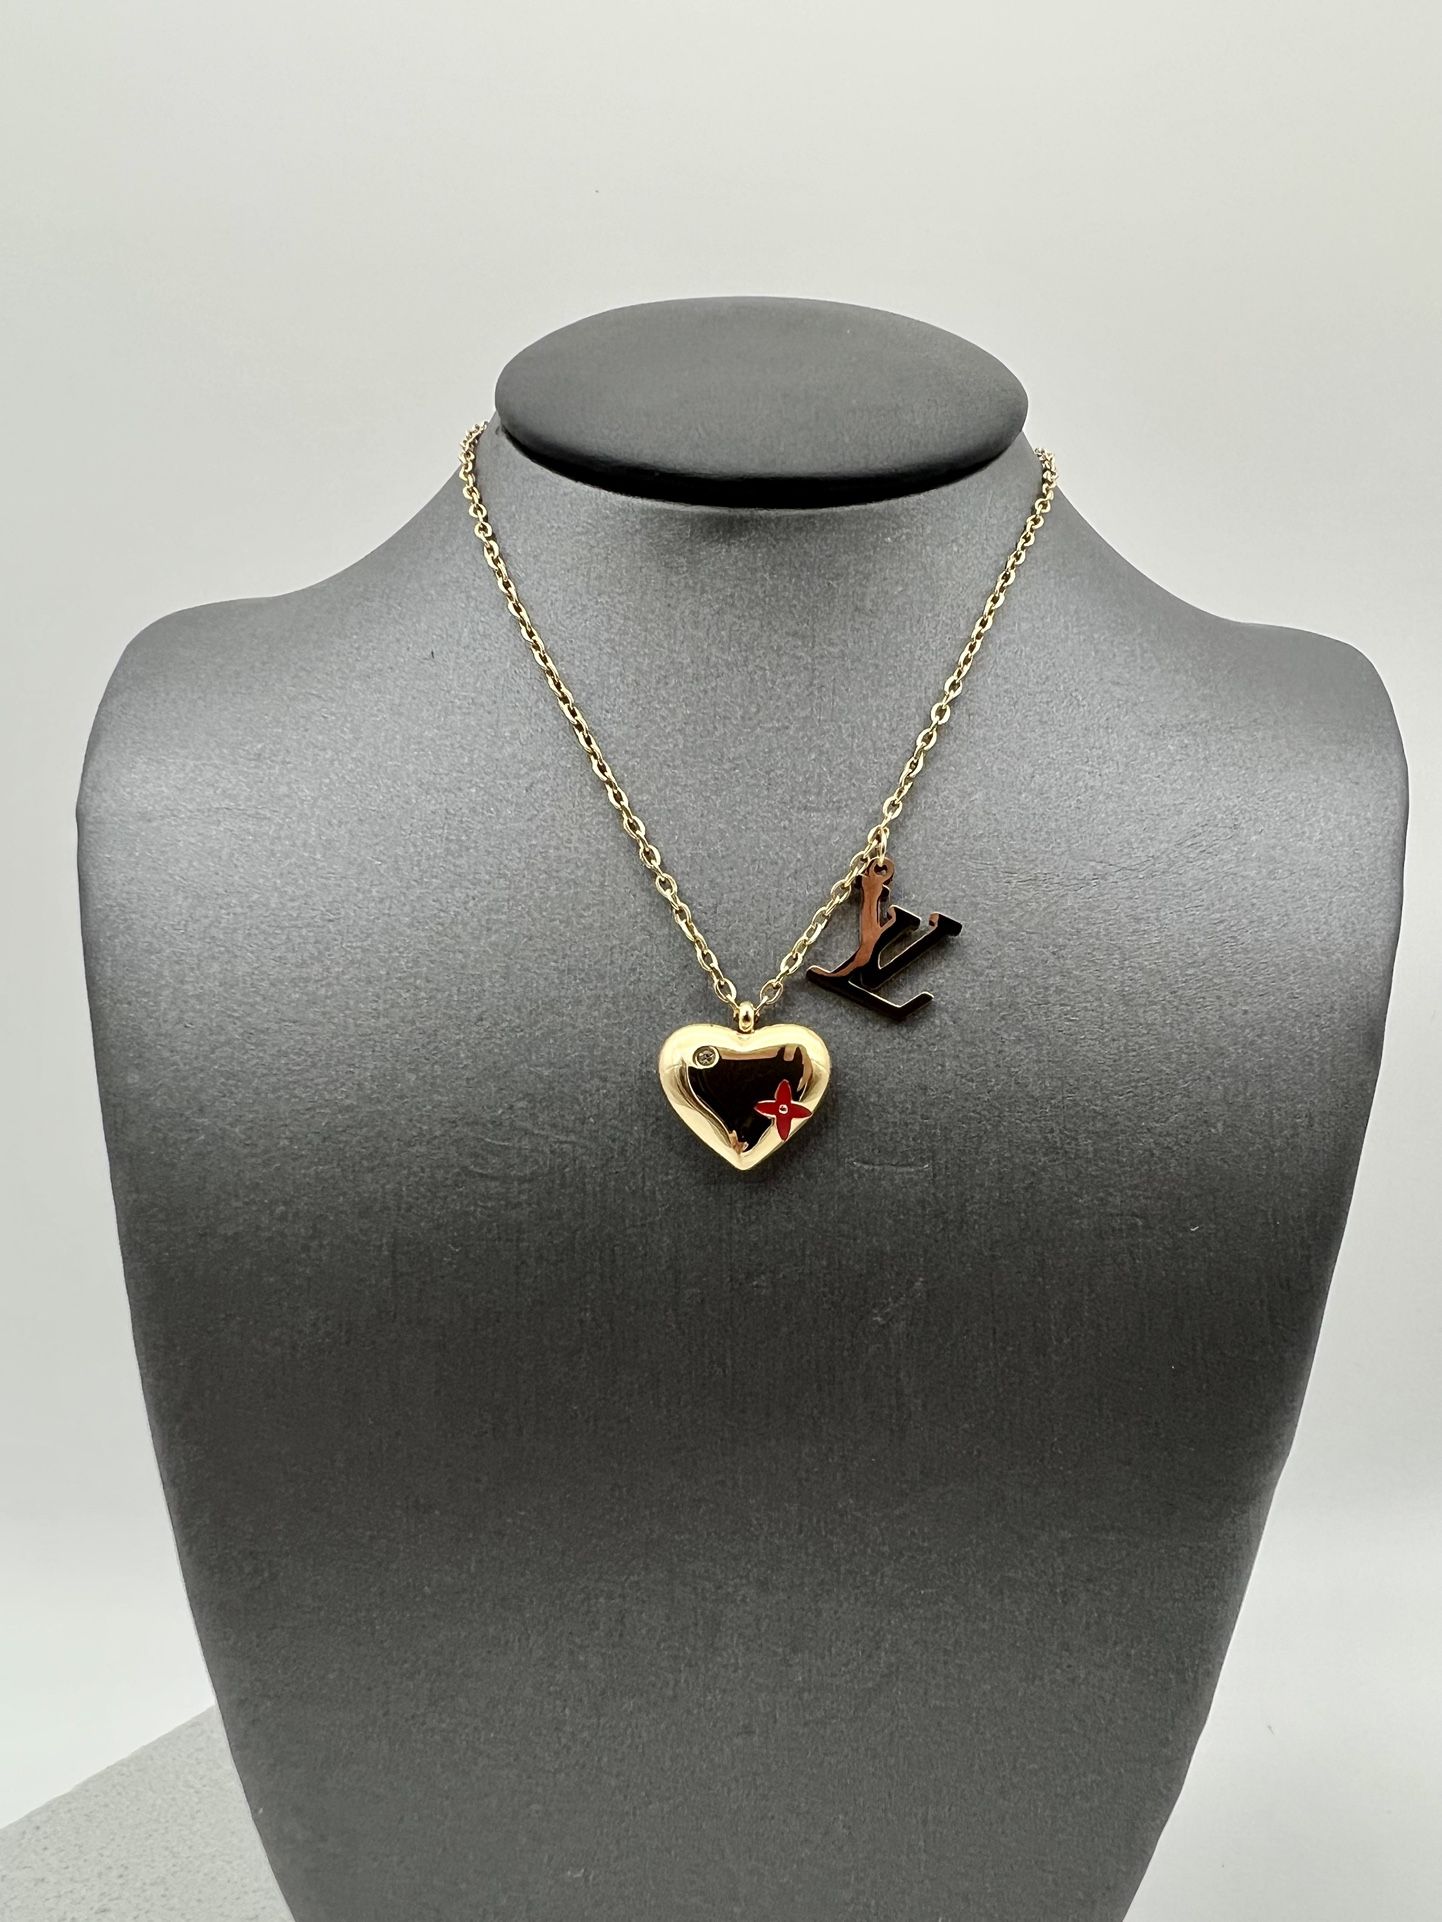 Necklace LV Heart for Sale in Homestead, FL - OfferUp